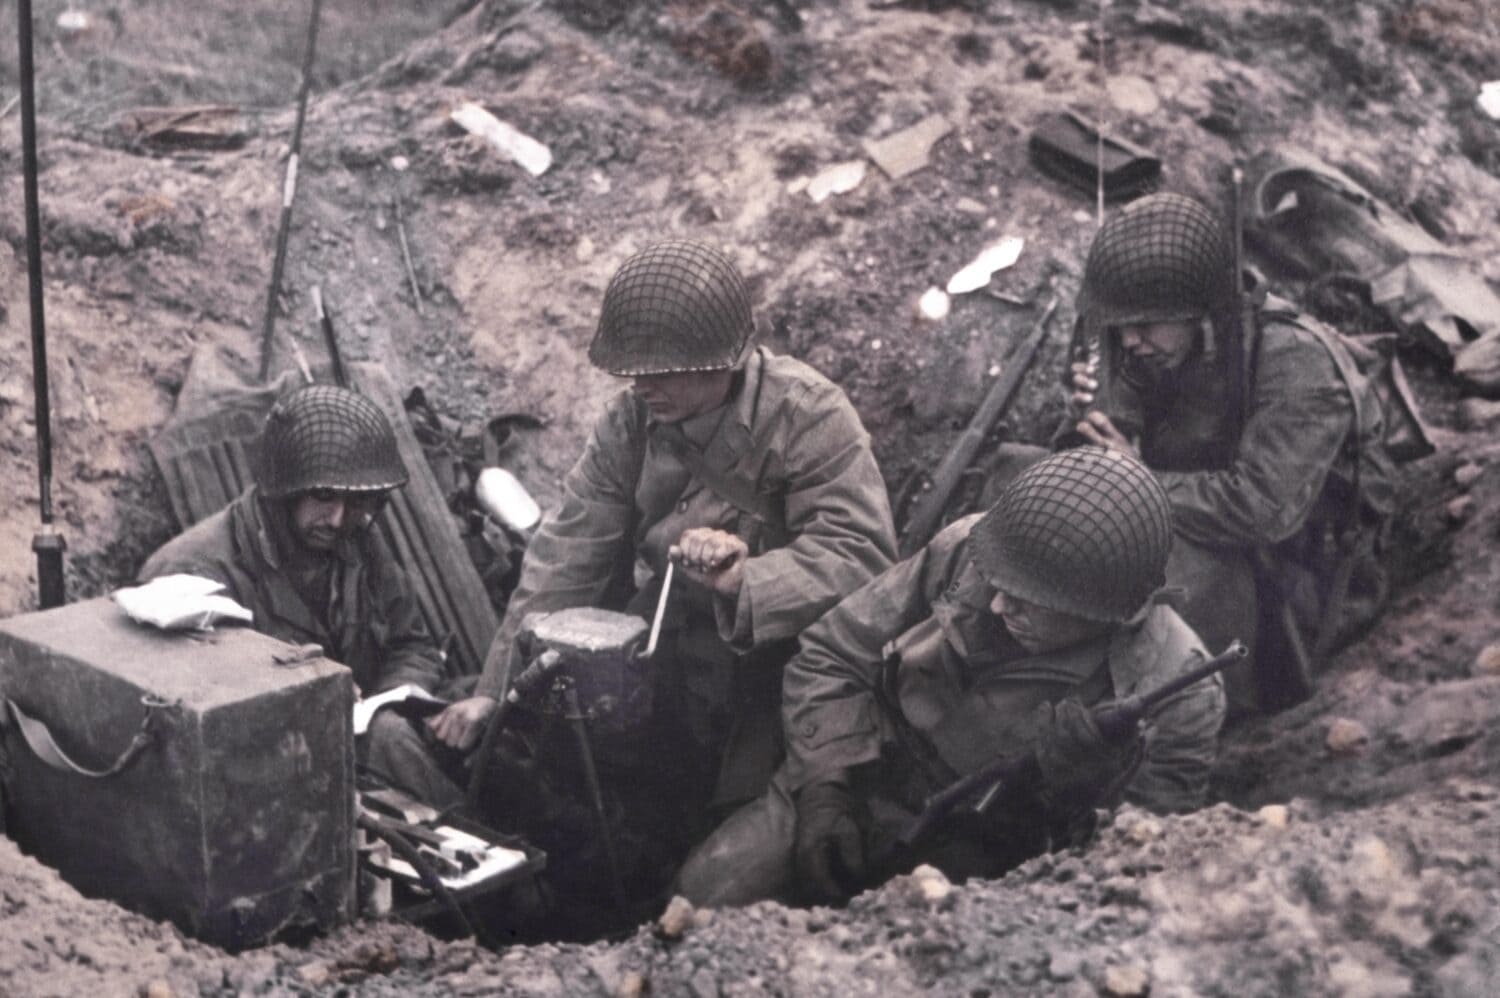 U.S. soldiers of a shore fire control group operating Signal Corps radios. One man cranks the hand generator, while another uses a hand-held radio set. June 6-8, 1944, Normandy, France.